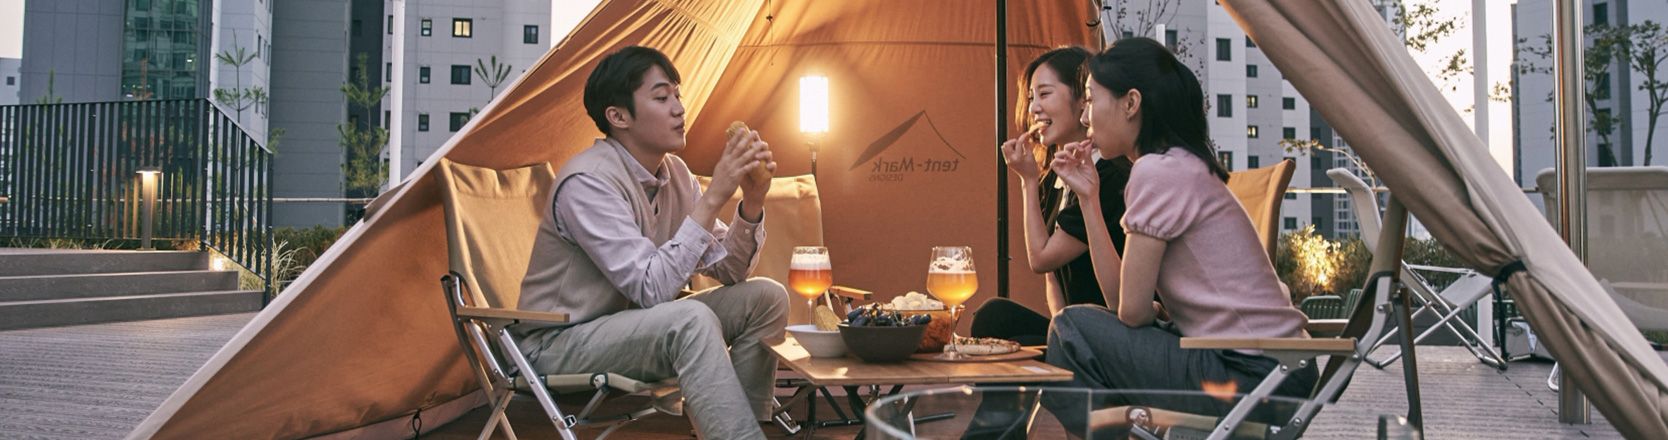 Three people are sitting around a table in front of a tent and they are sharing food.